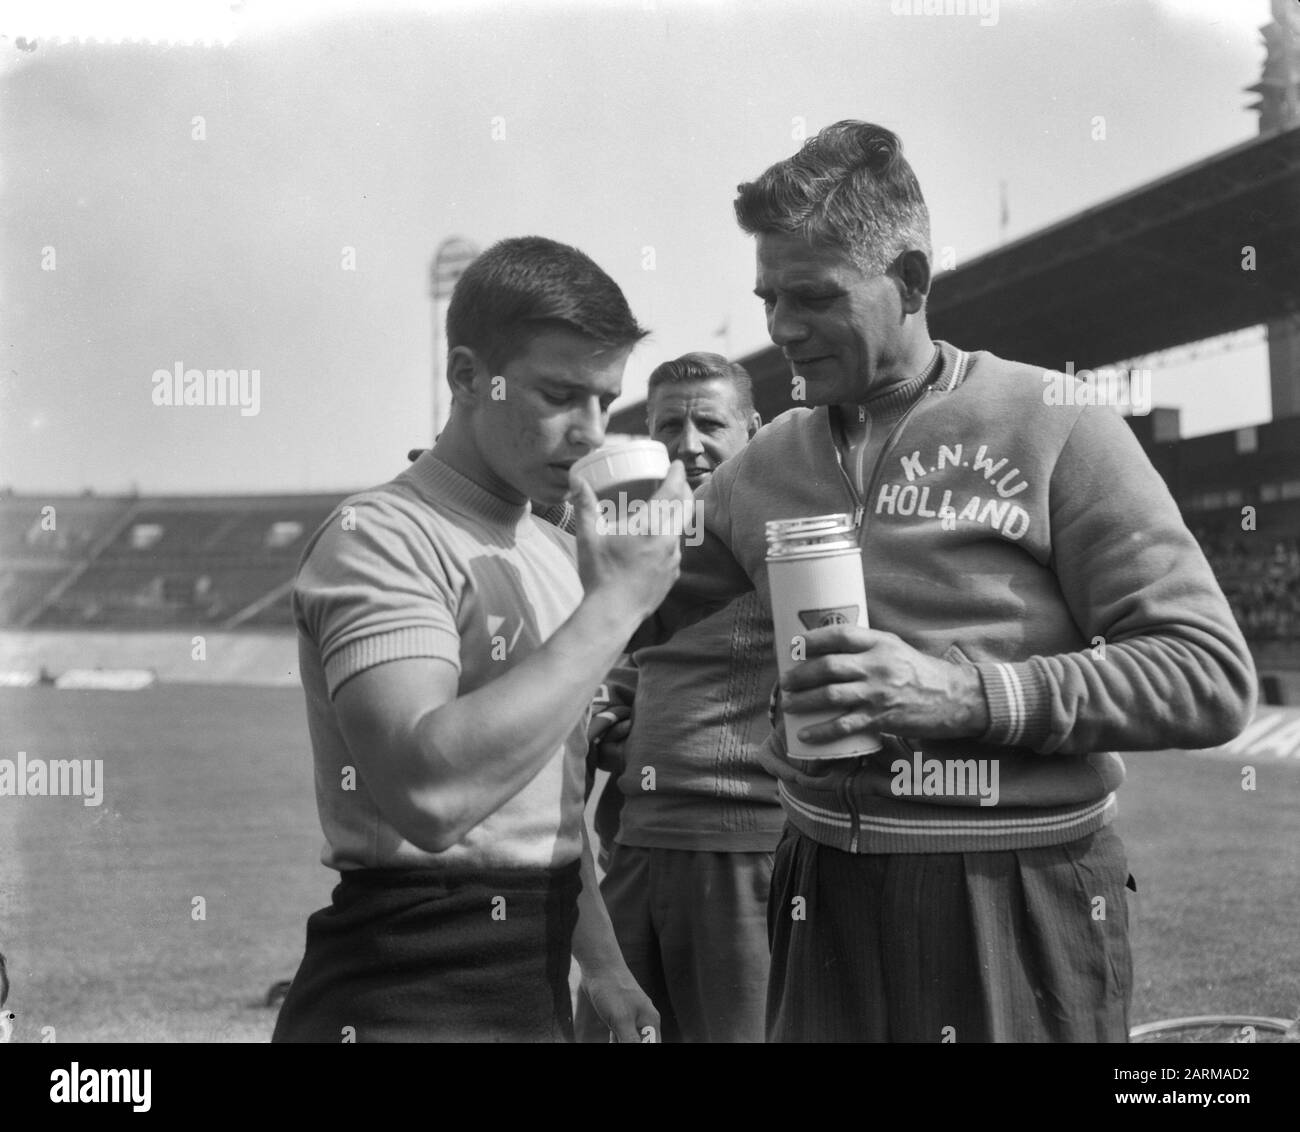 World Championship cycling on the track in the Olympic stadium in Amsterdam, Mees Gerritsen is taken care of Date: 8 August 1959 Stock Photo